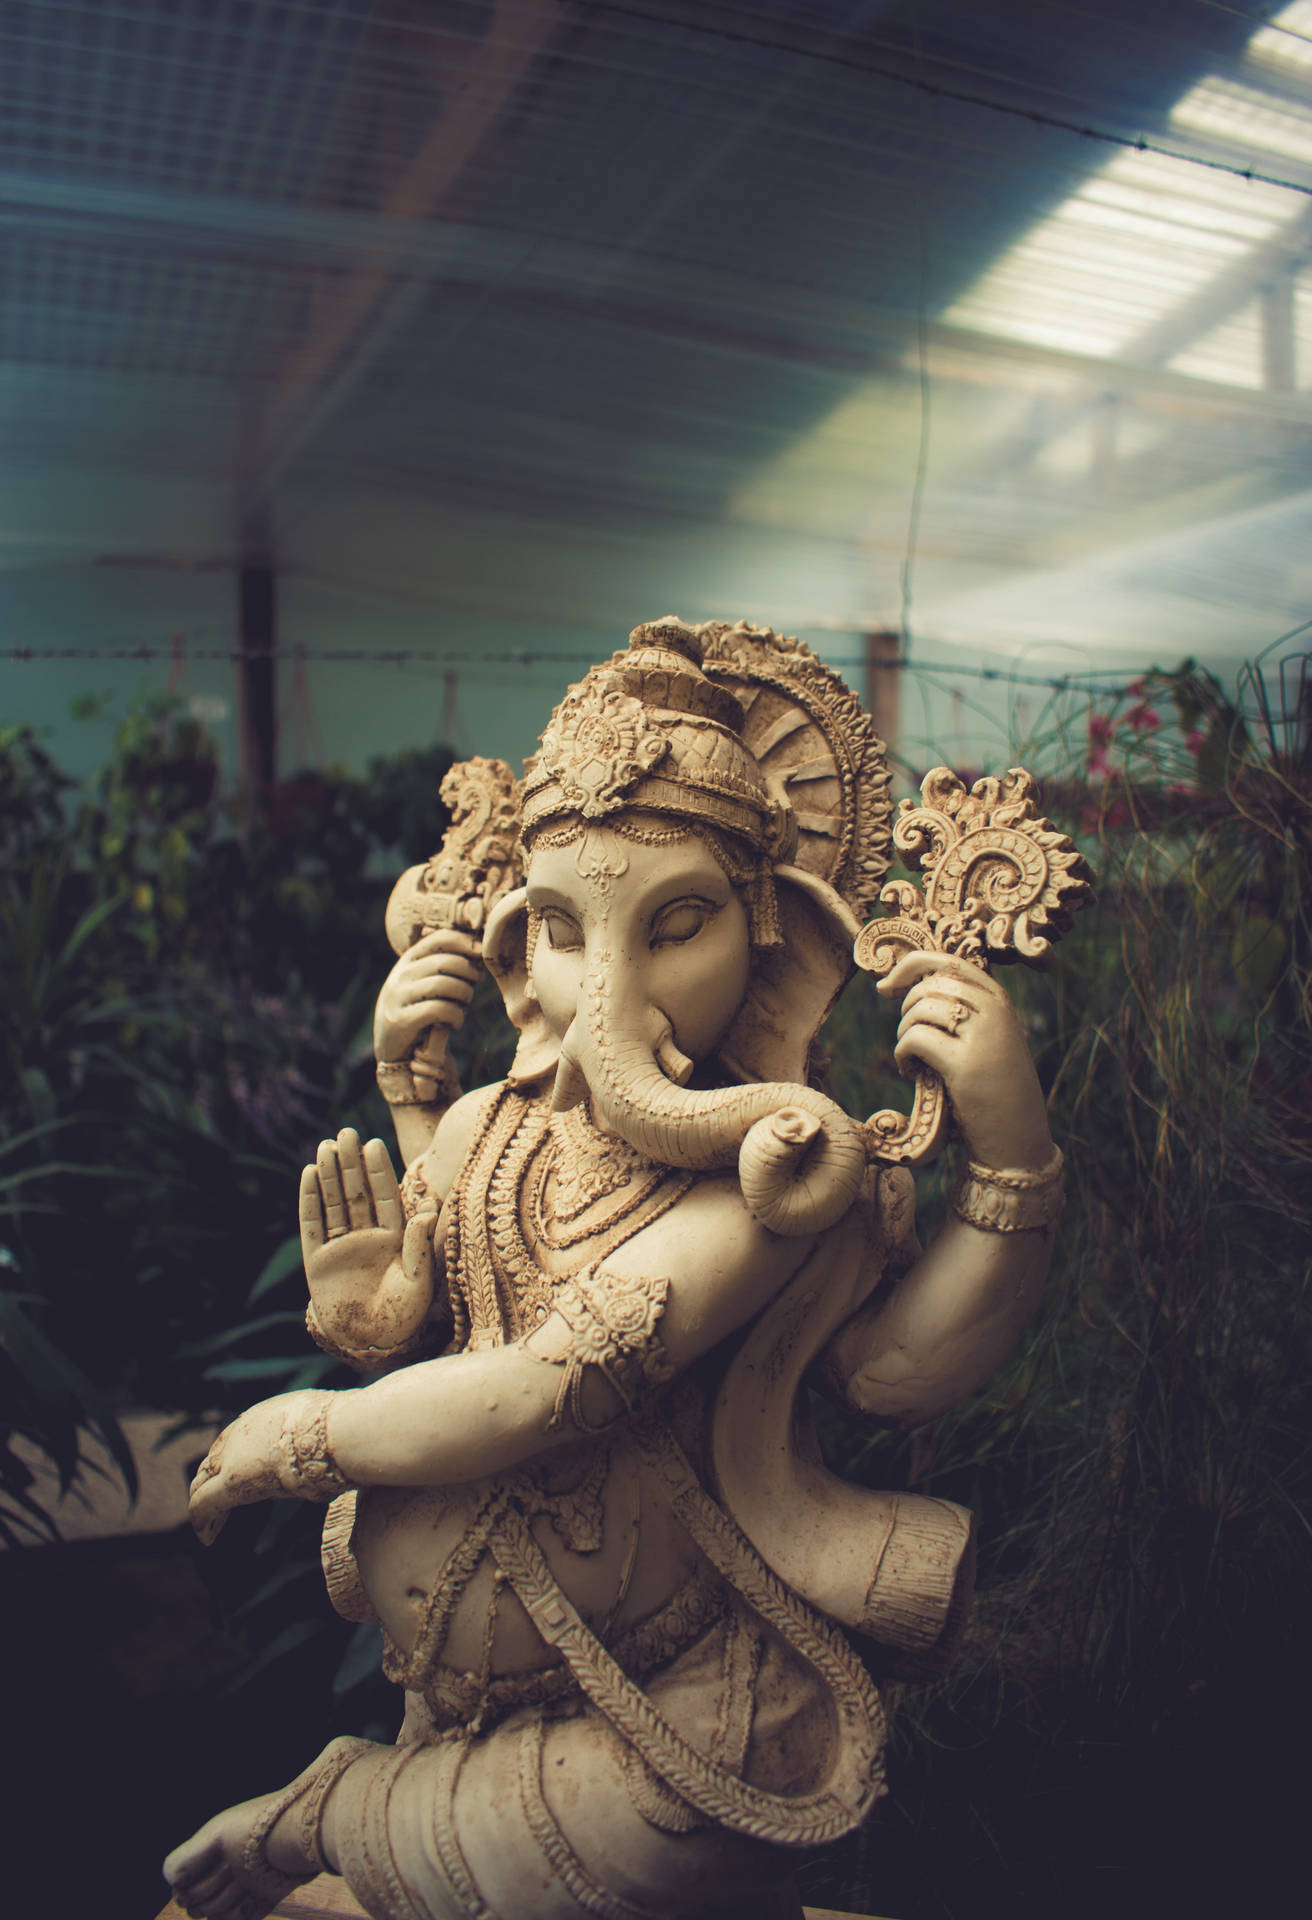 Majestic Hd Image Of Cement Ganesha Statue Background